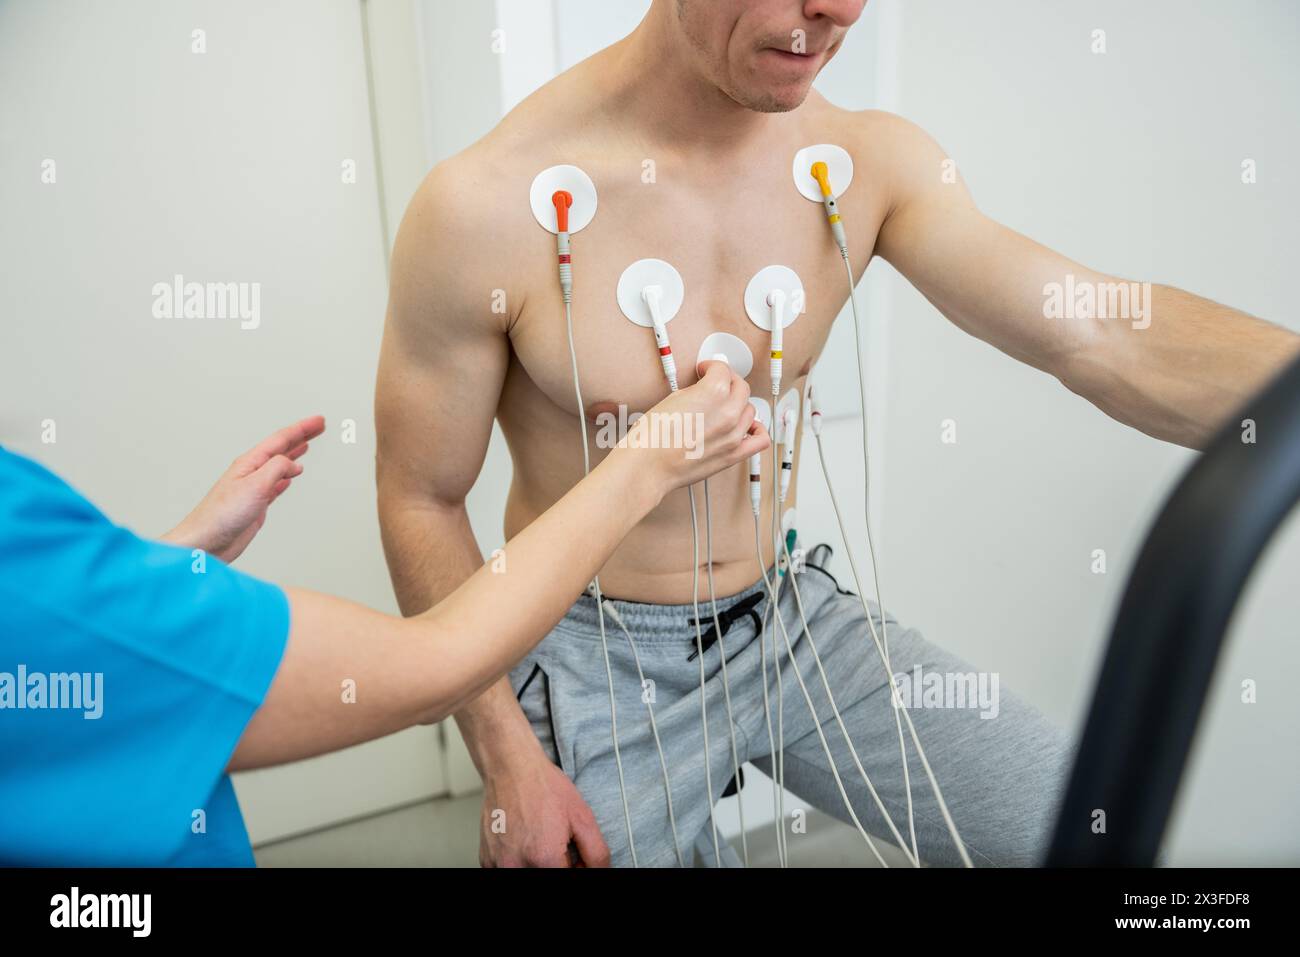 A patient undergoing a cardiac test with electrodes attached to their chest. Stock Photo